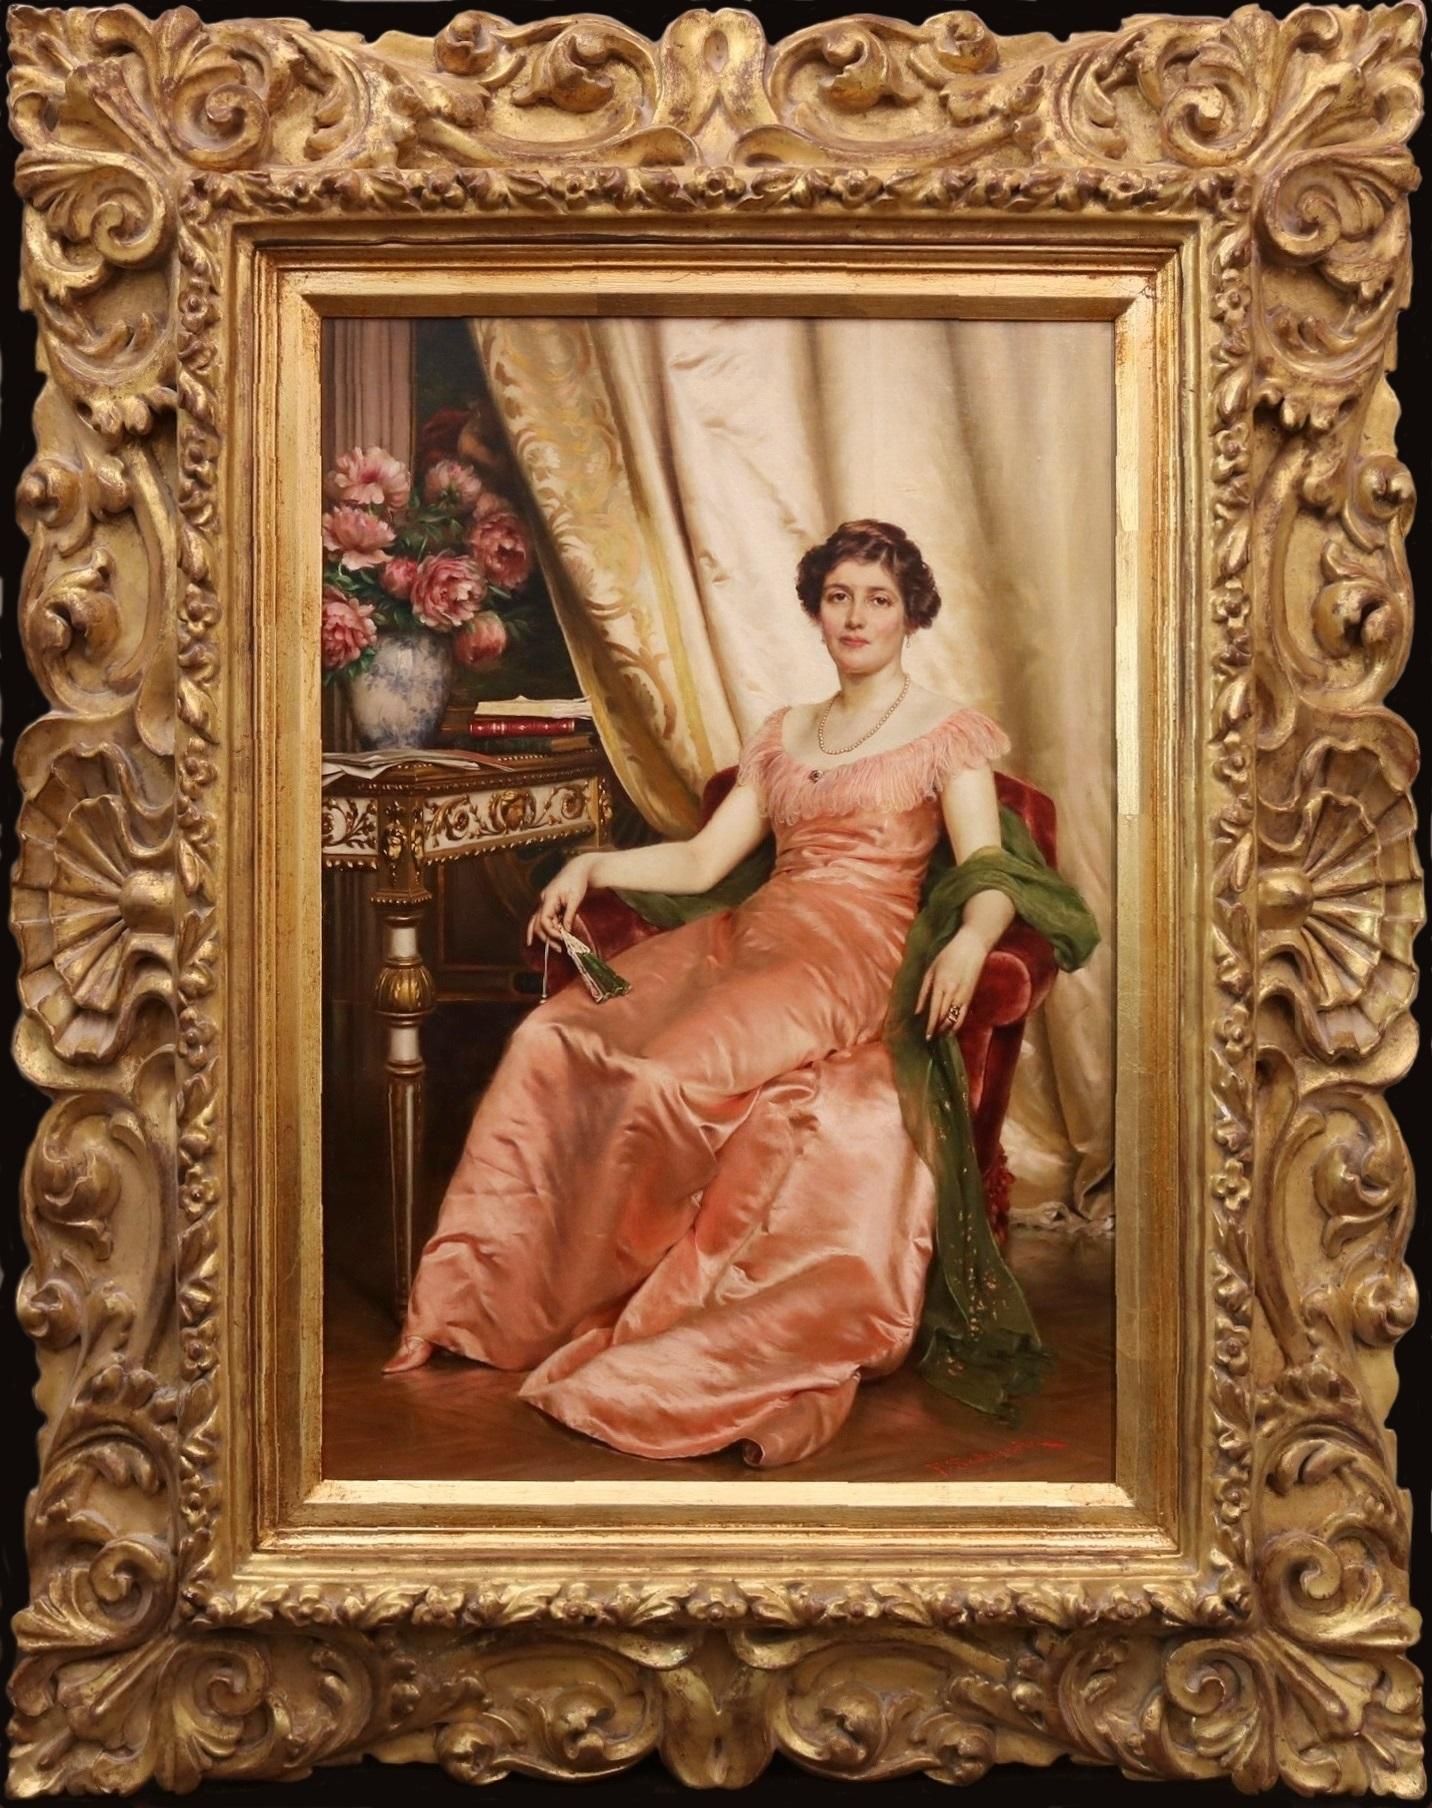 Regina dei Fiori - 19th Century Society Oil Painting Portrait of Italian Beauty - Brown Figurative Painting by Frédéric Soulacroix